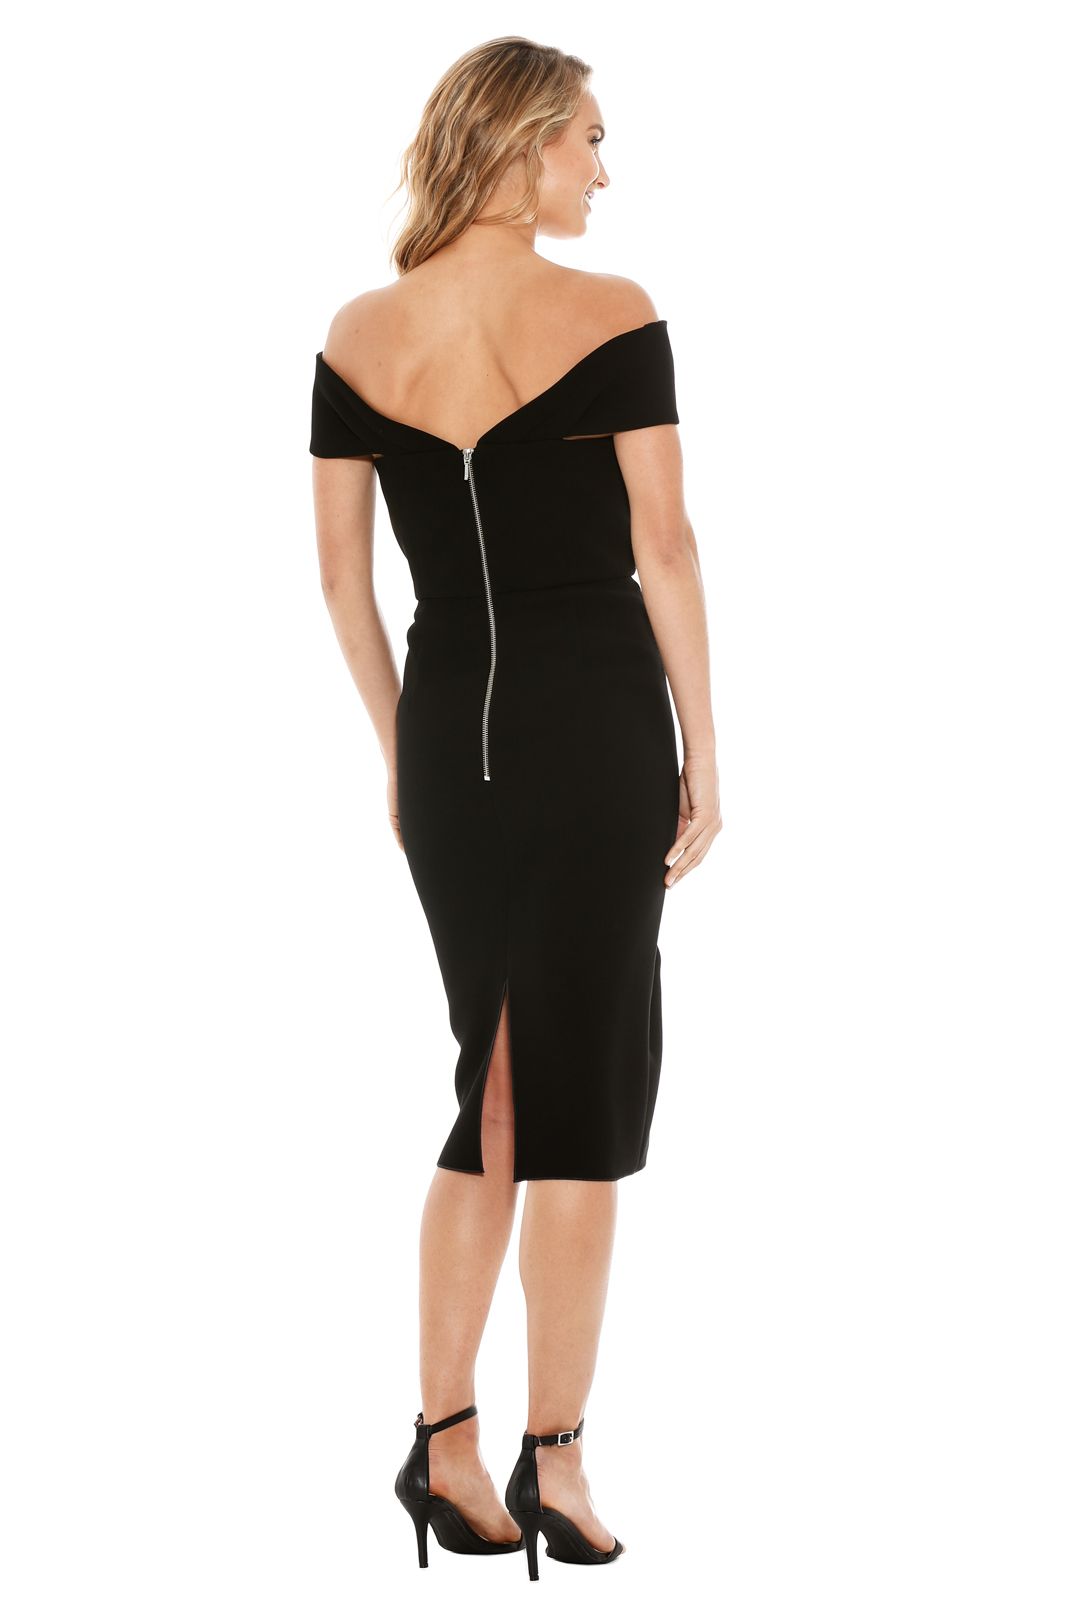 Double Crepe Corrine Dress in Black by Yeojin Bae for Hire